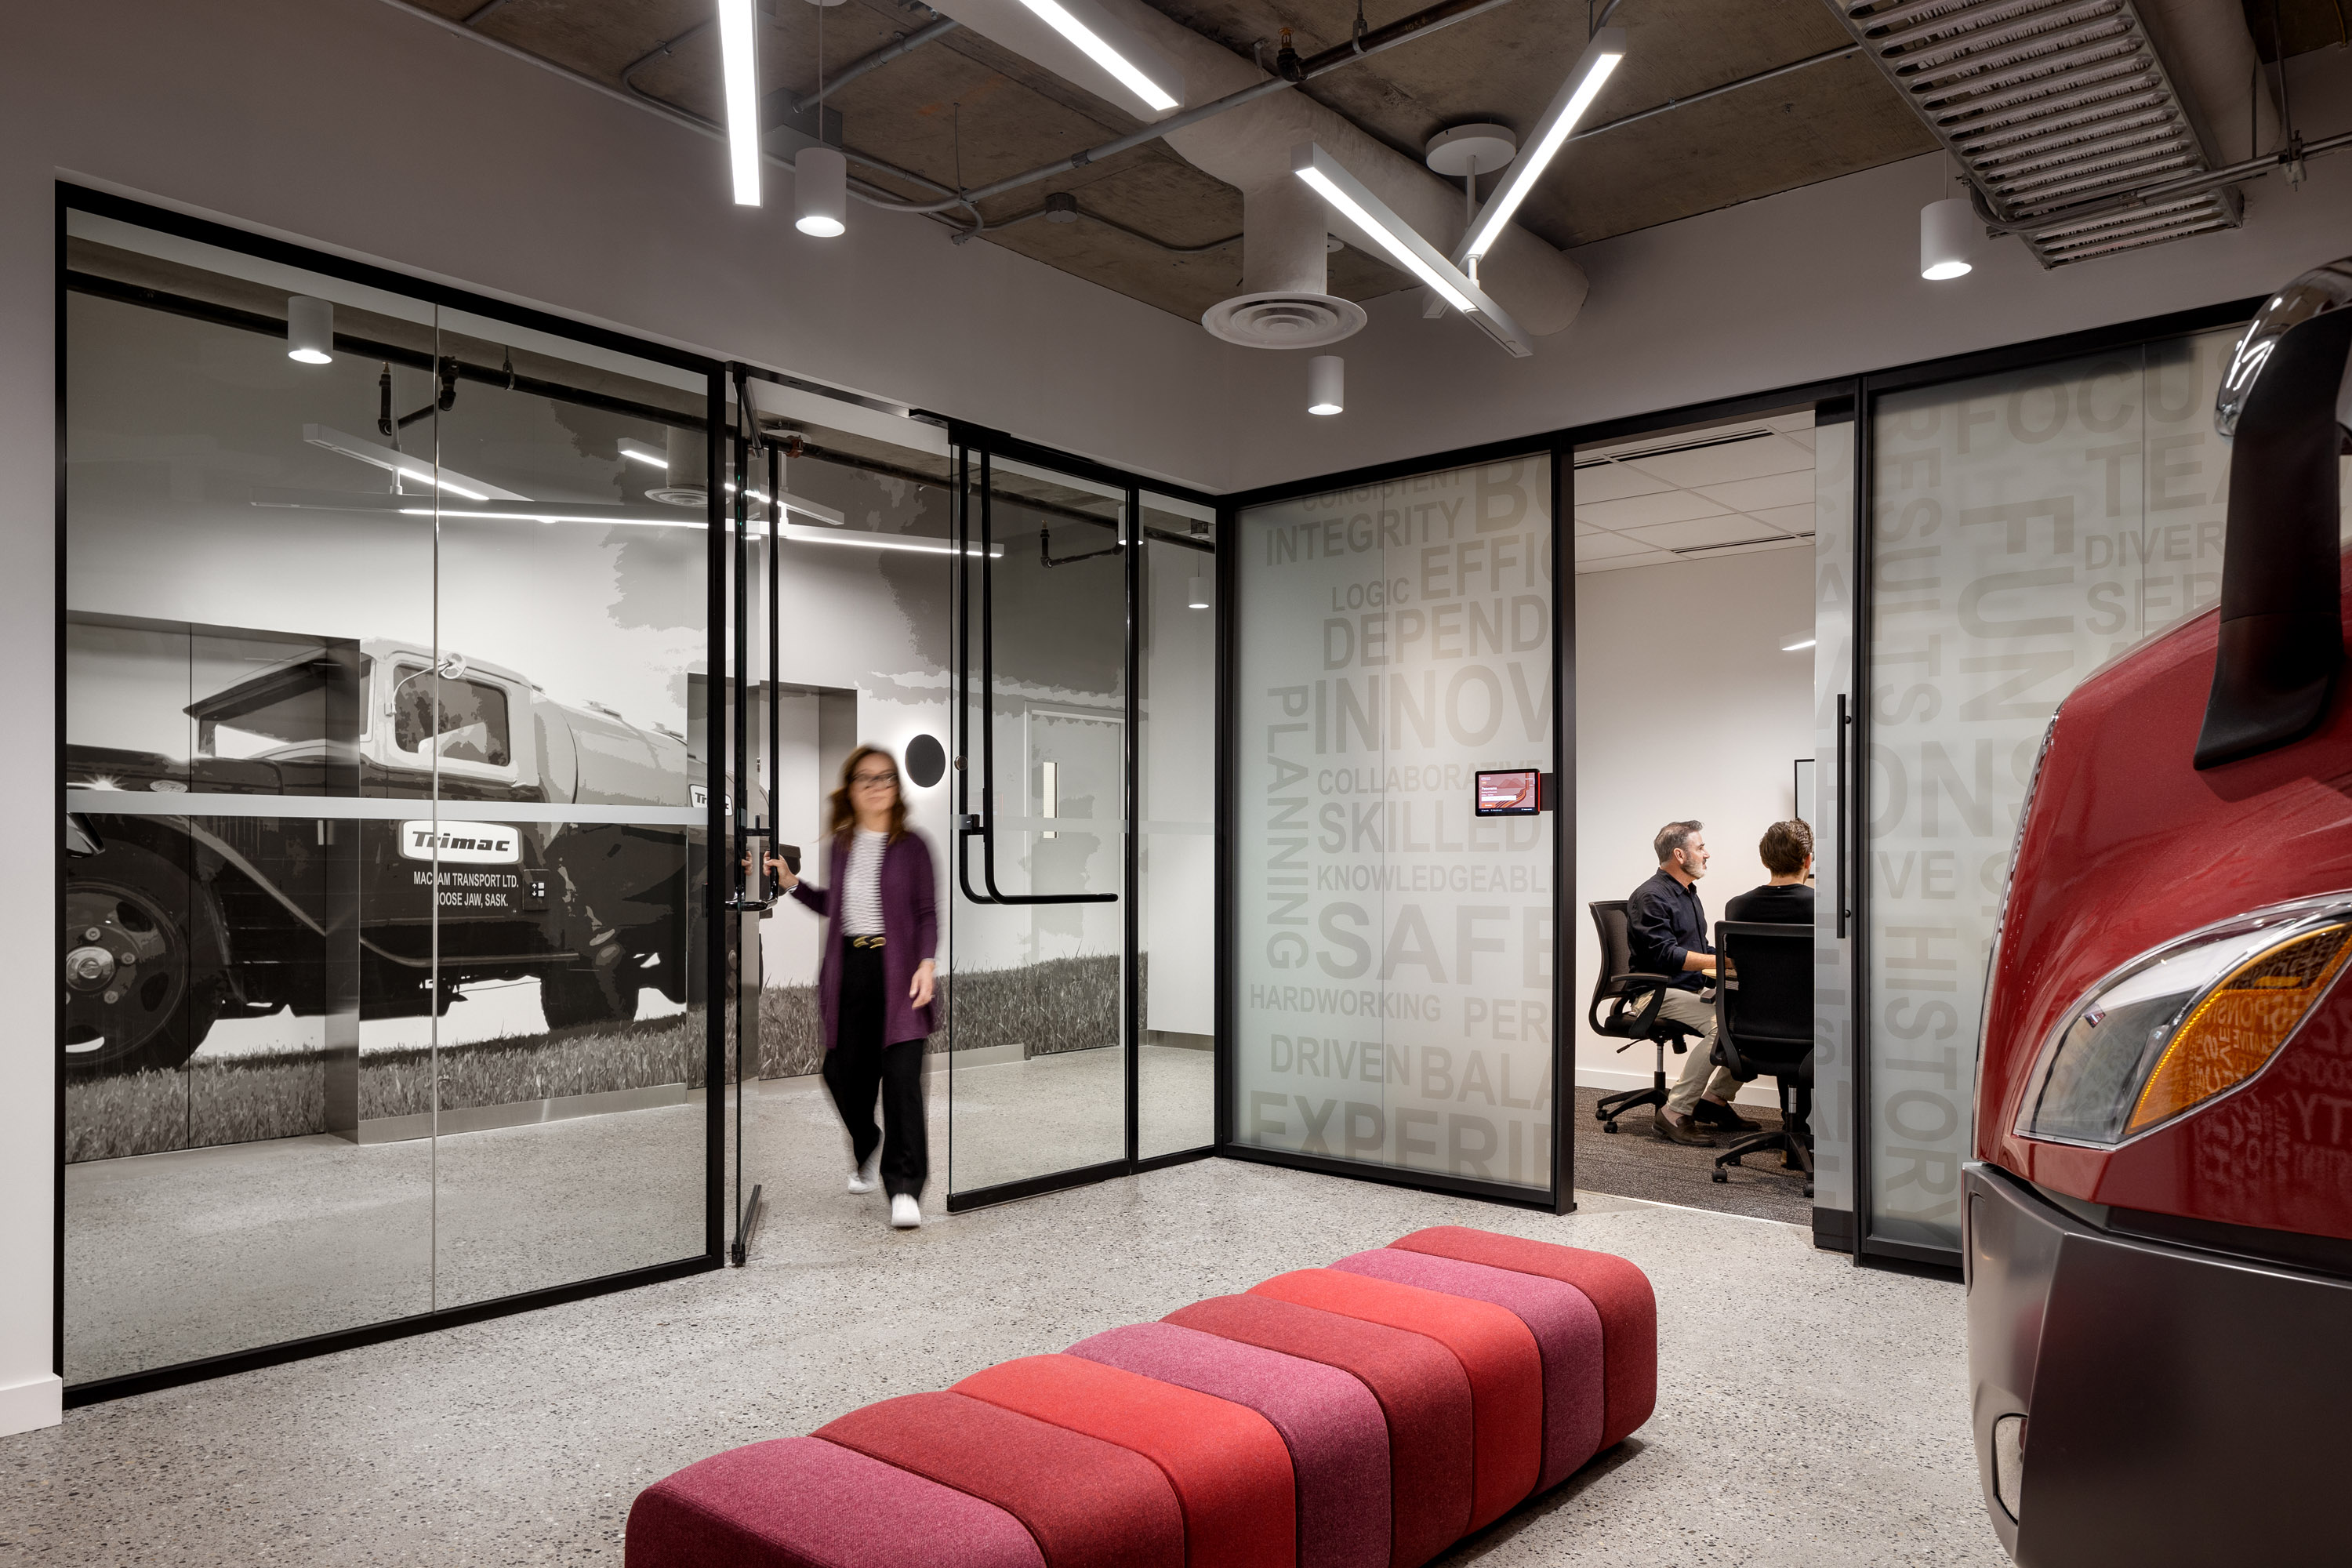 trimac-office-commercial-ointerior-photographer-eymeric-widling01